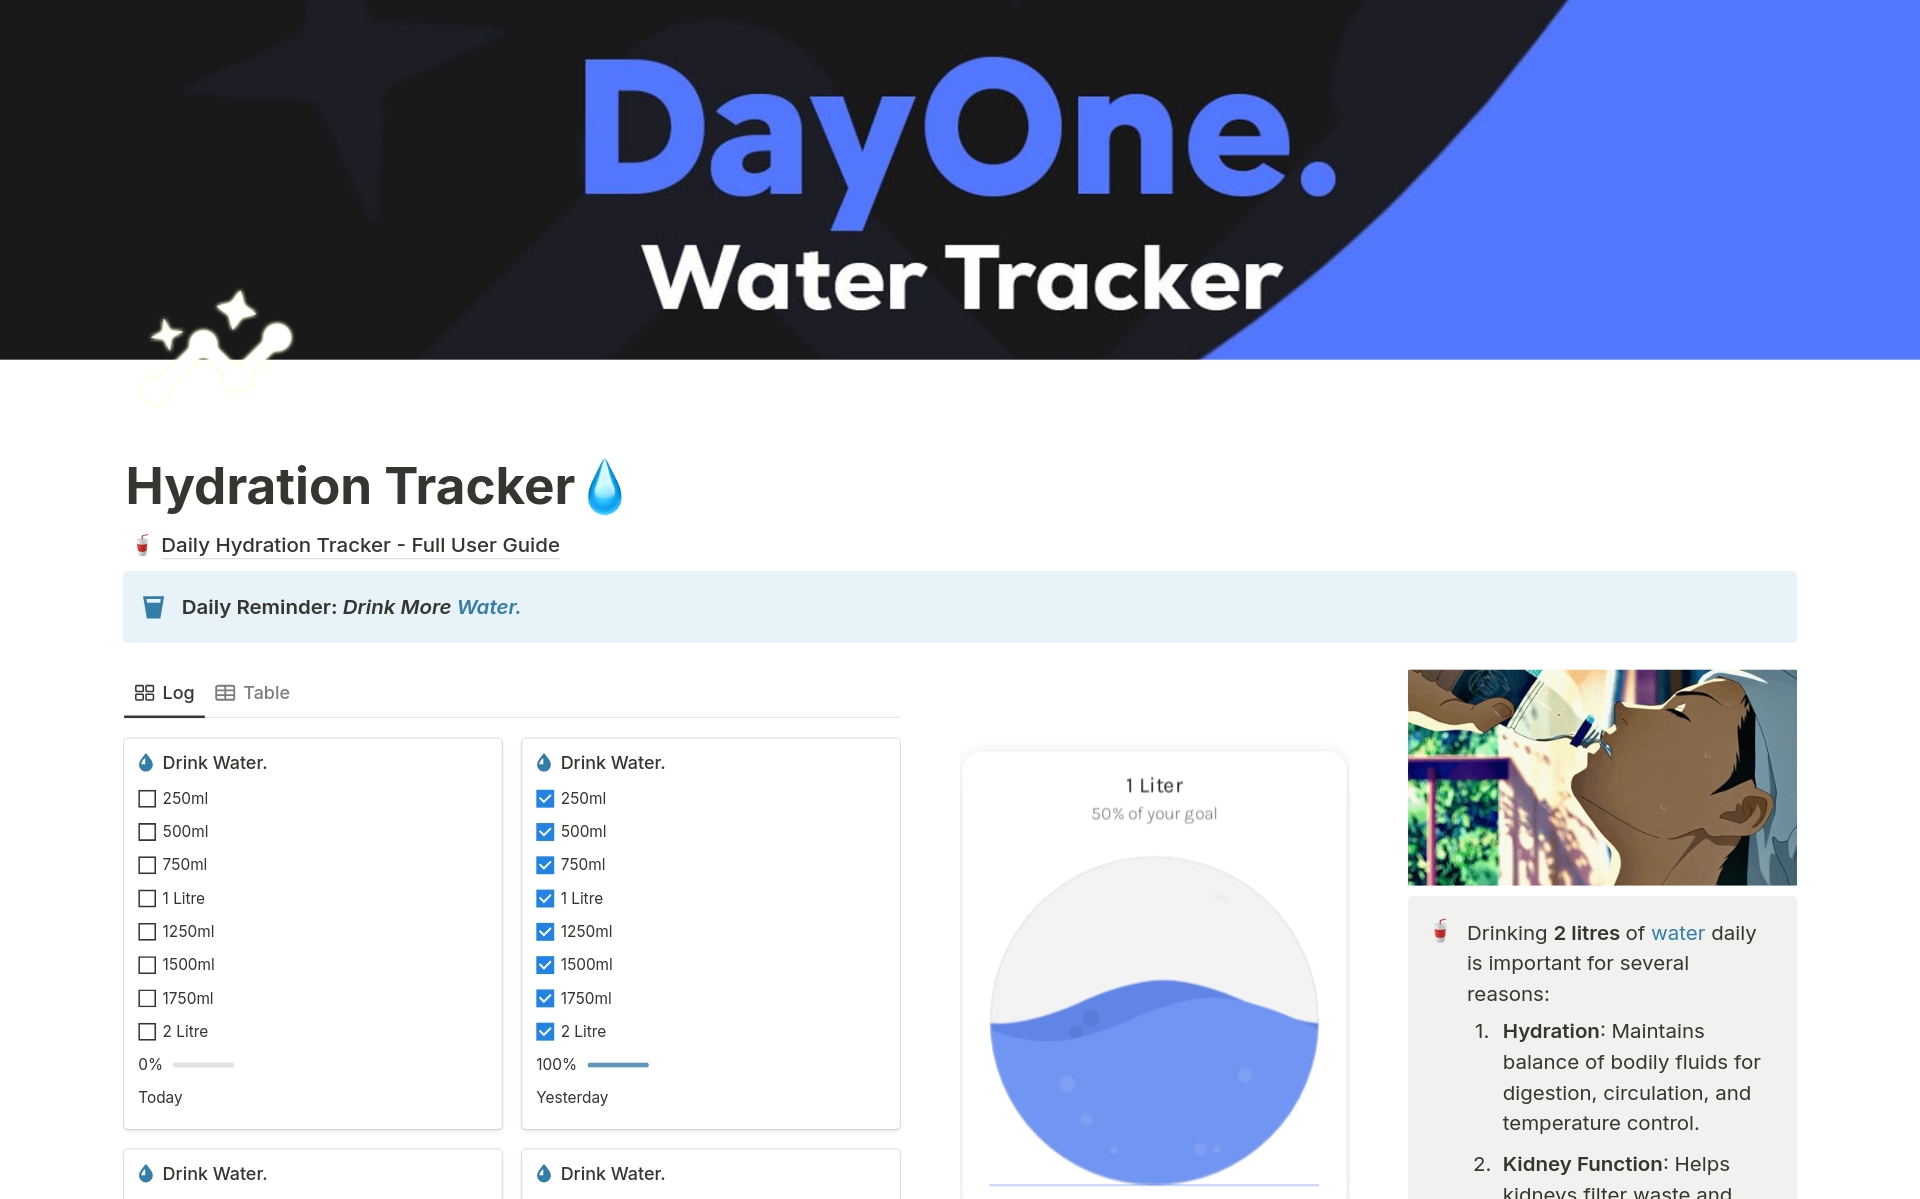 The Day One Hydration tracker is a simple yet effective tool for ensuring adequate daily water intake (2 Litres)
